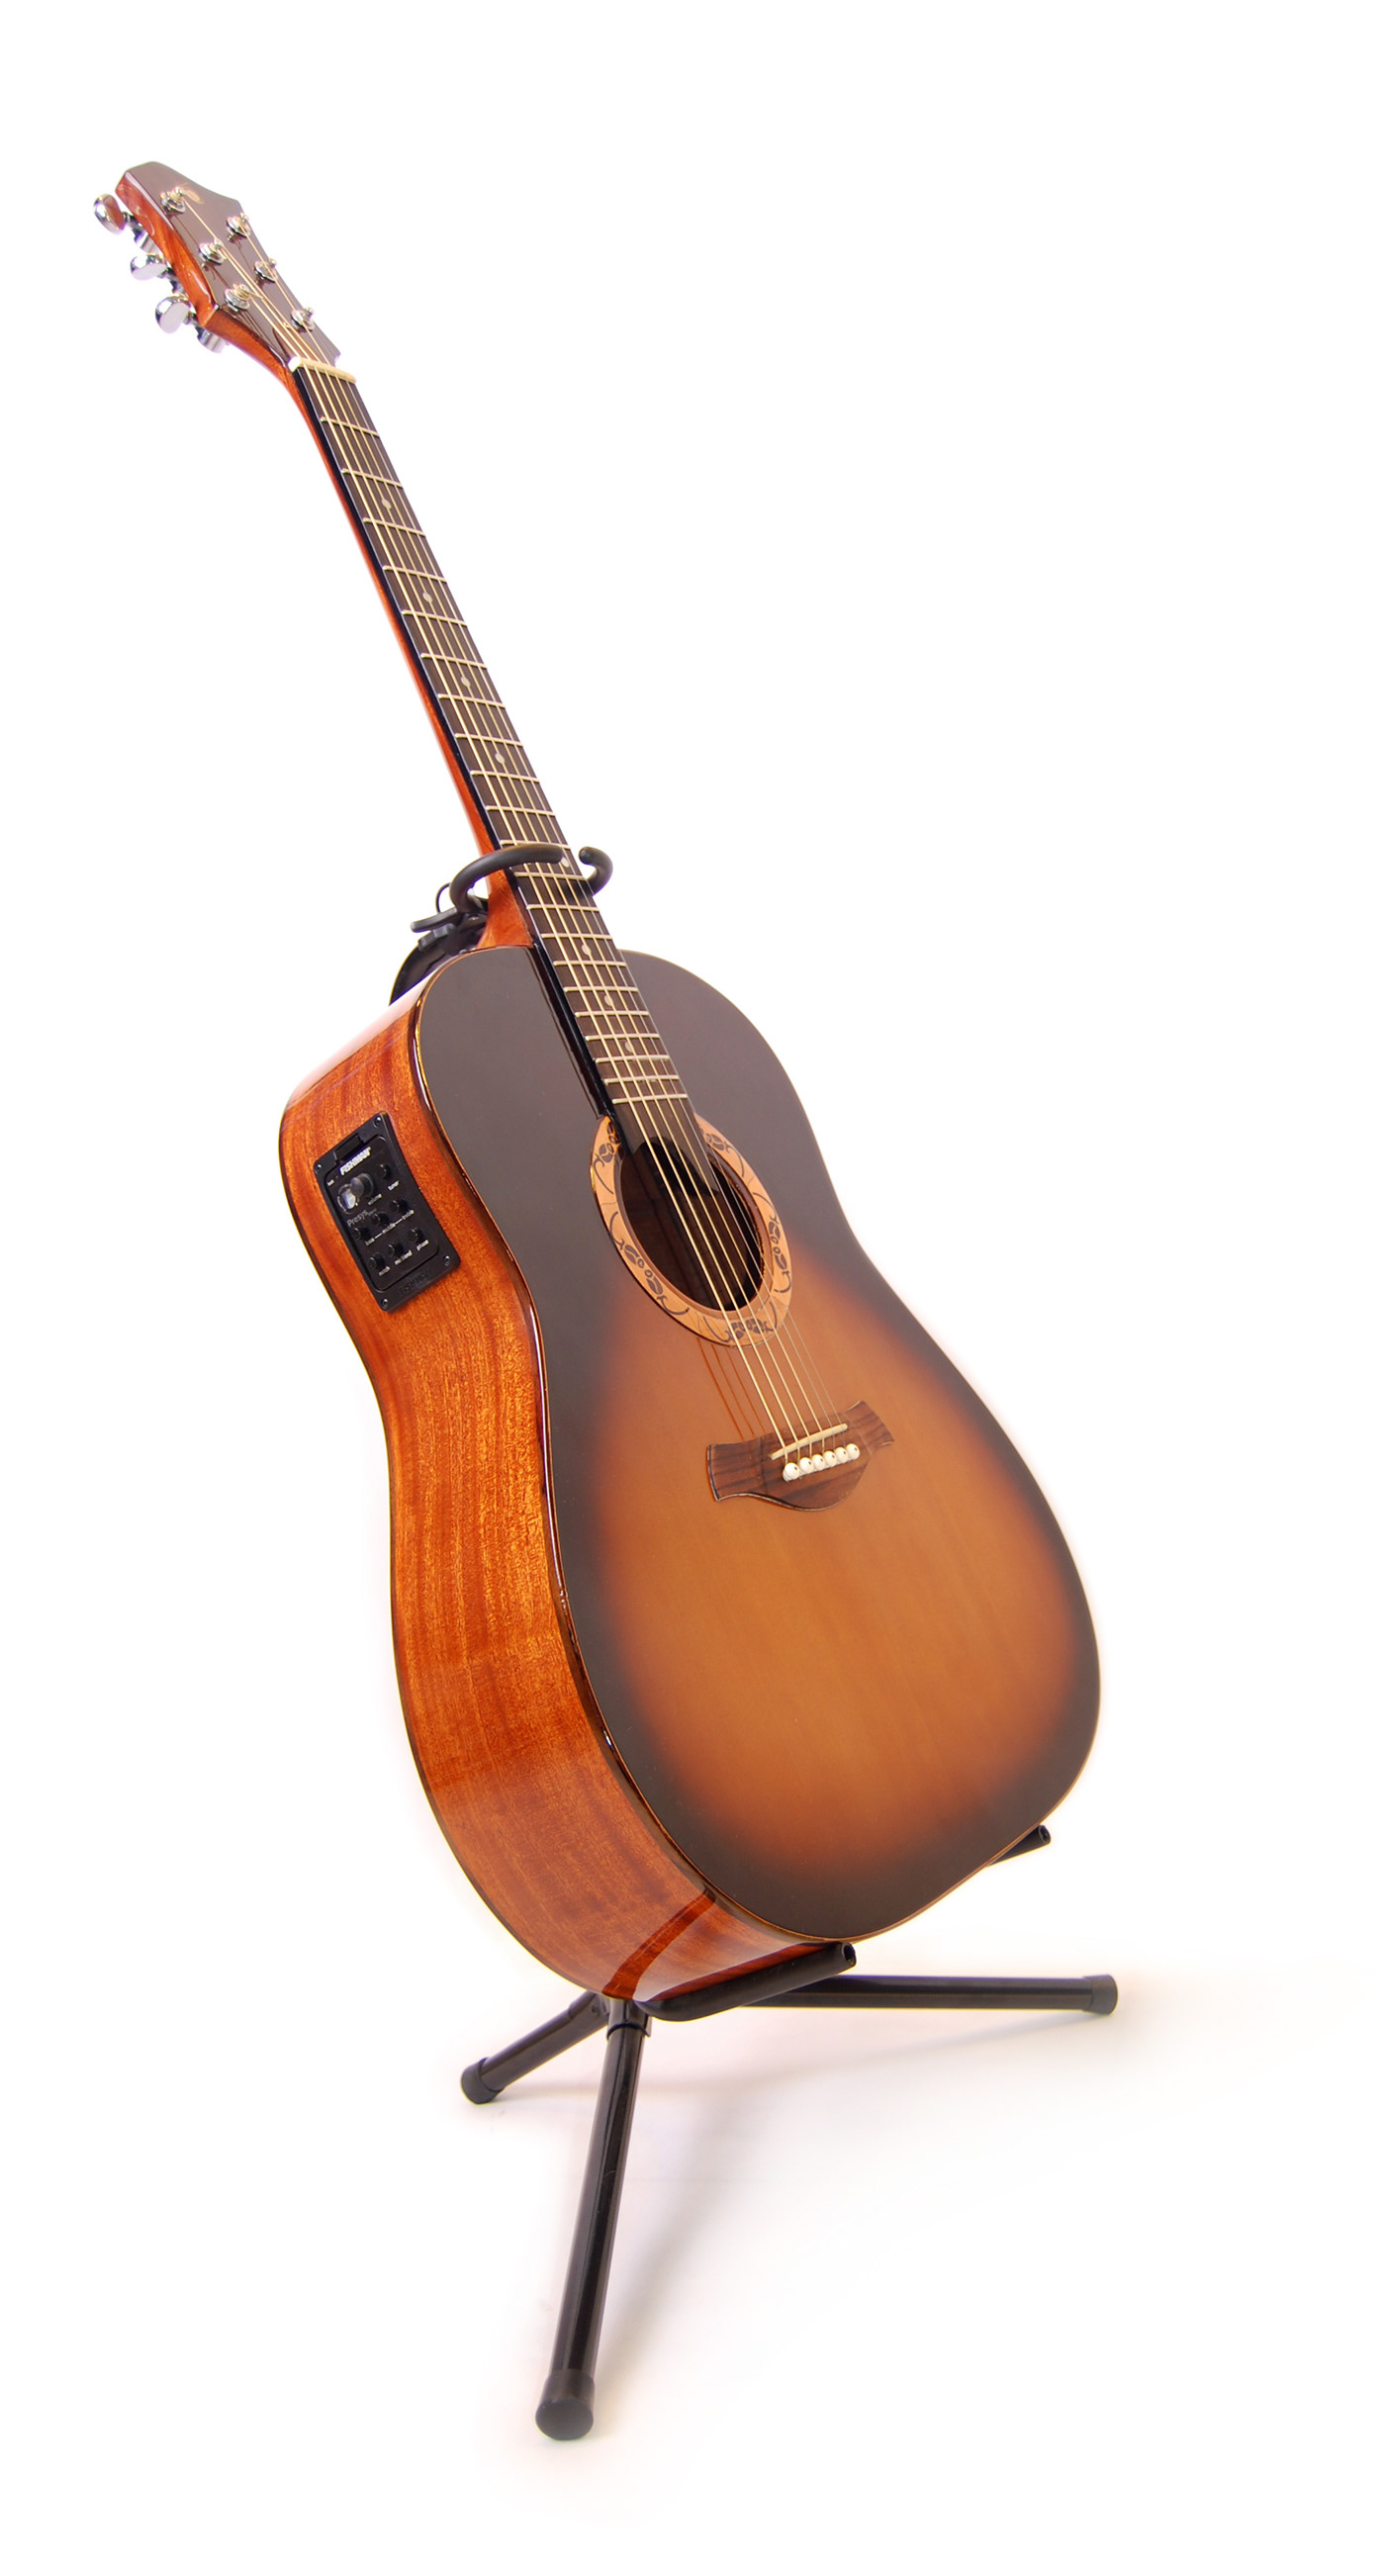 guitar hadcrafted secco guitar Dreadnought product design